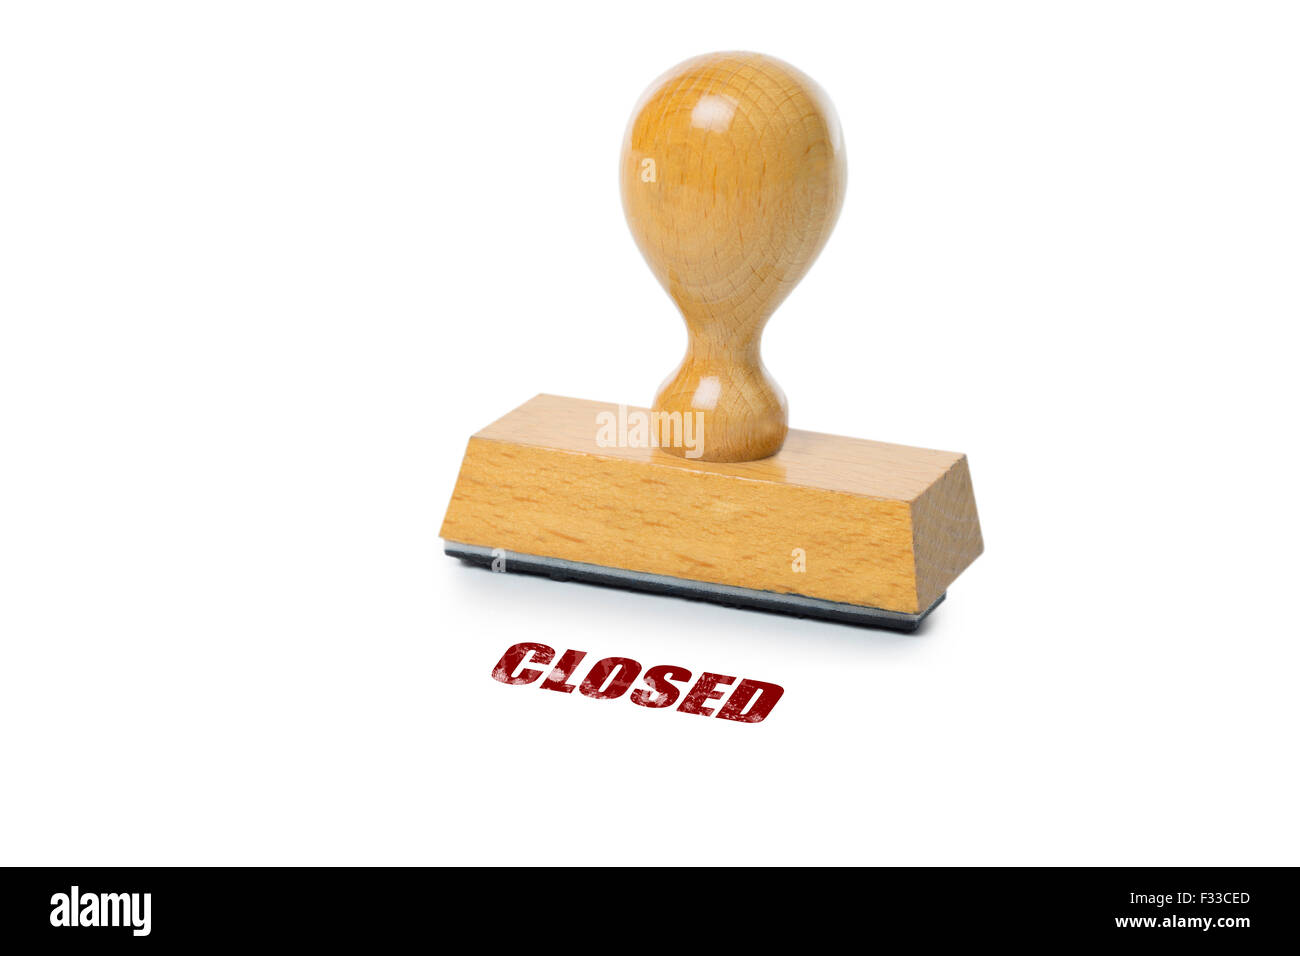 Closed printed in red ink with wooden Rubber stamp isolated on white background Stock Photo